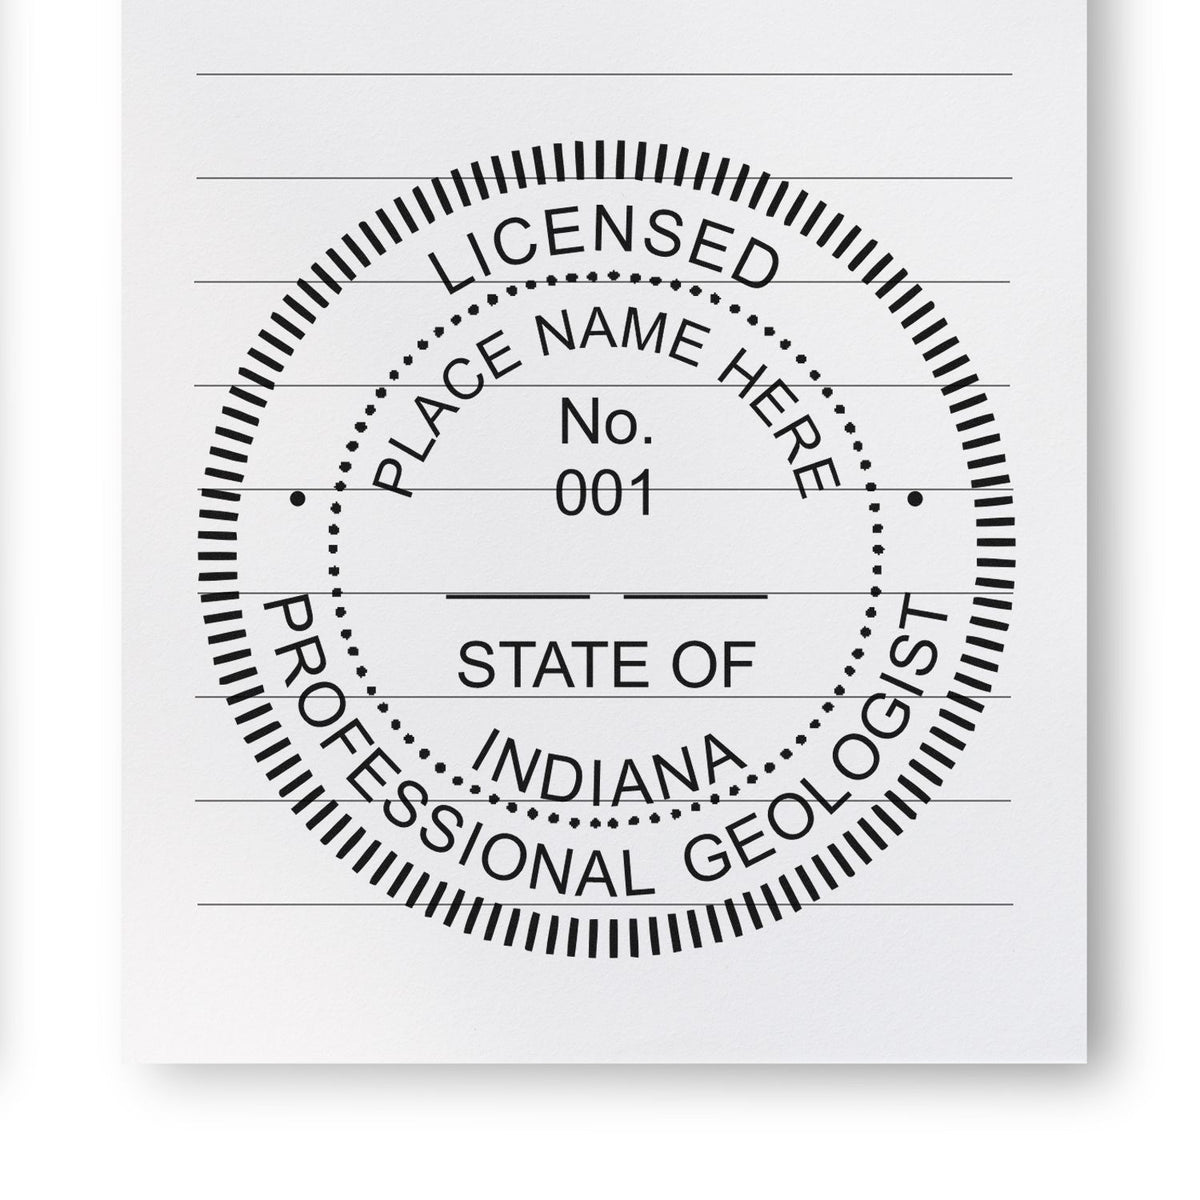 A photograph of the Indiana Professional Geologist Seal Stamp stamp impression reveals a vivid, professional image of the on paper.